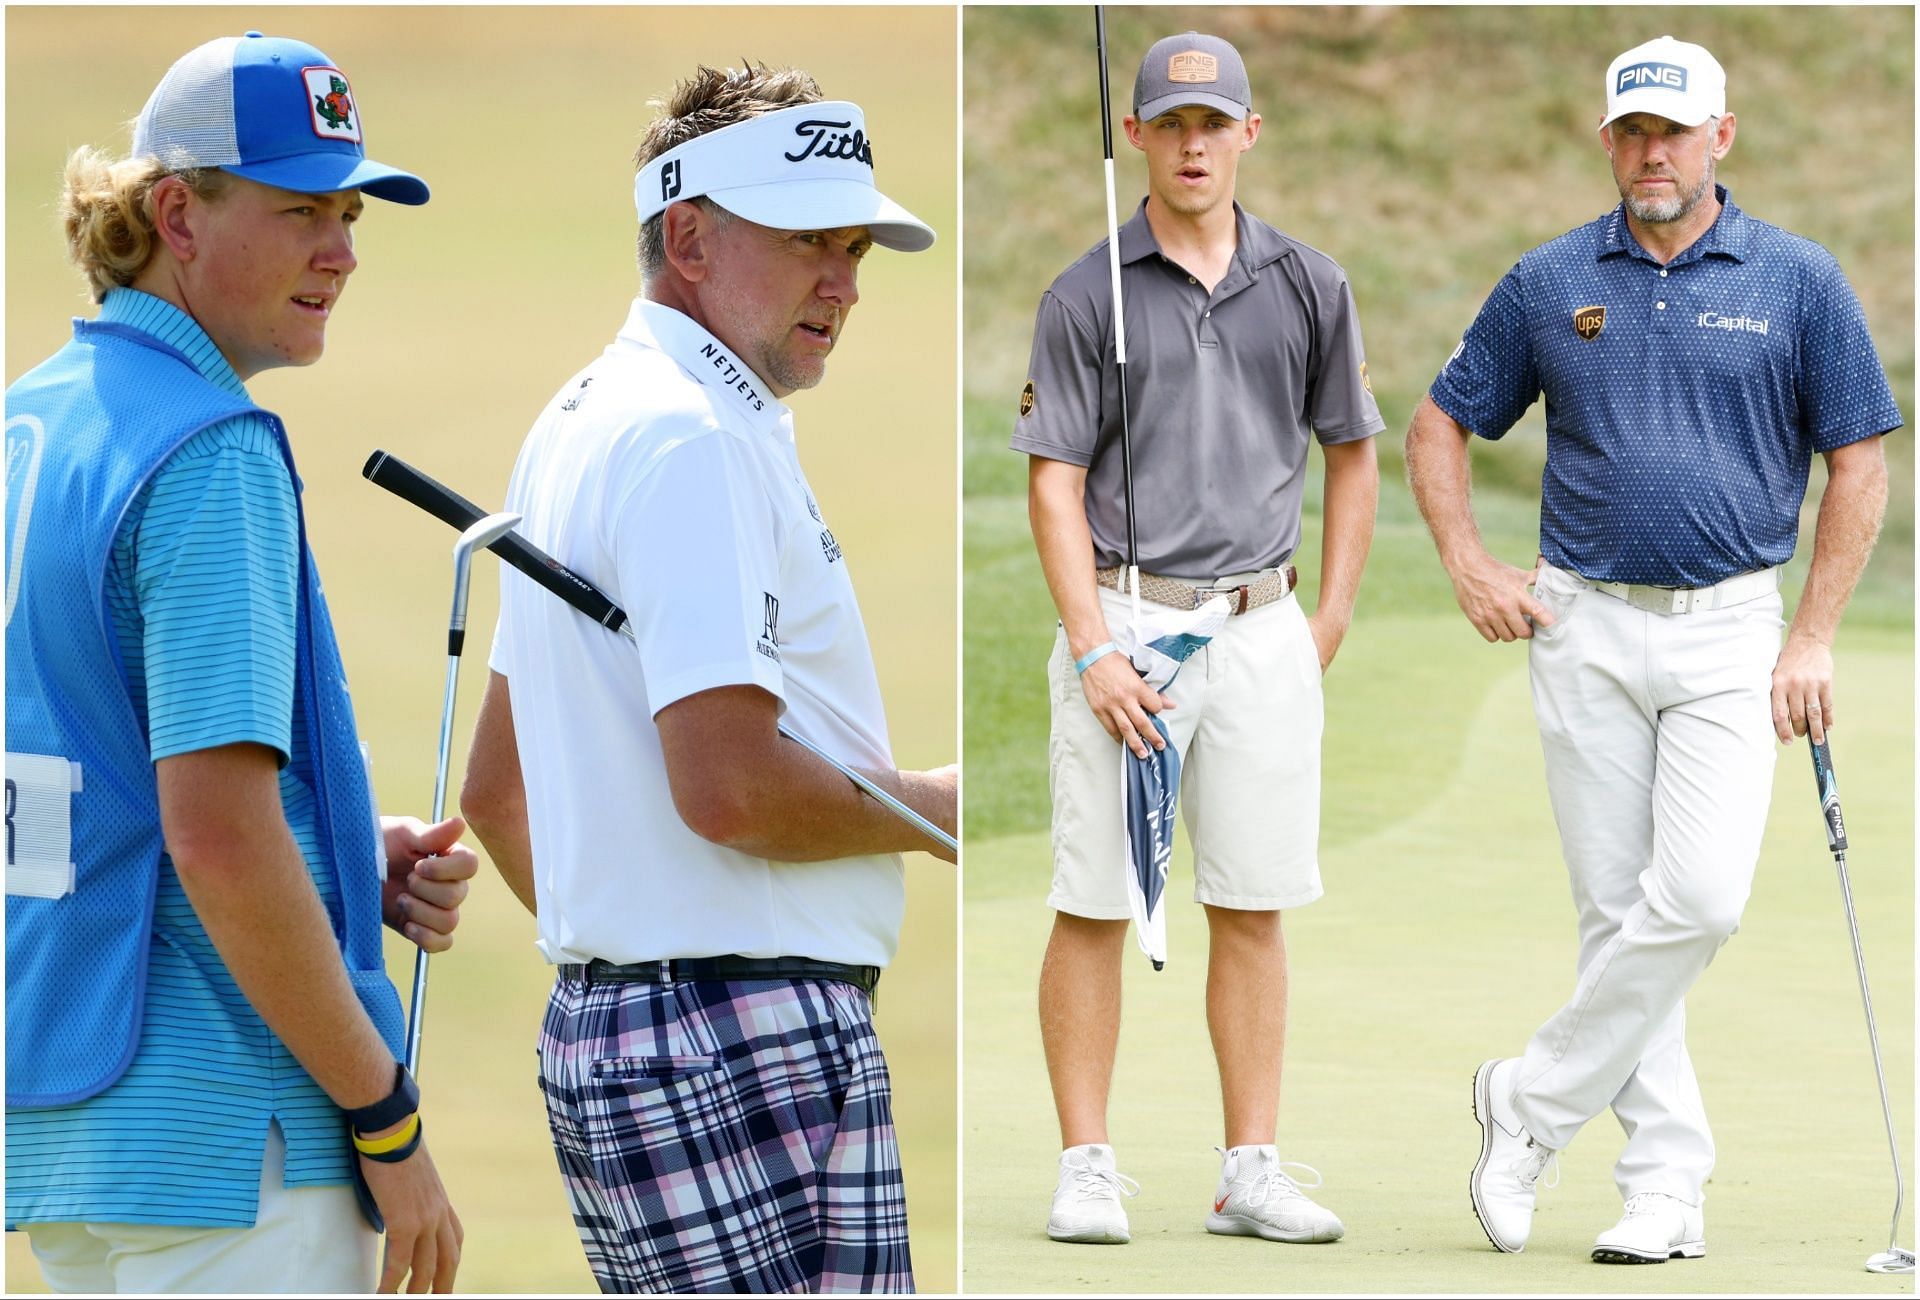 Ian Poulter and Luke Poulter &amp; Lee Westwood and Sam Westwood (via Getty Images))